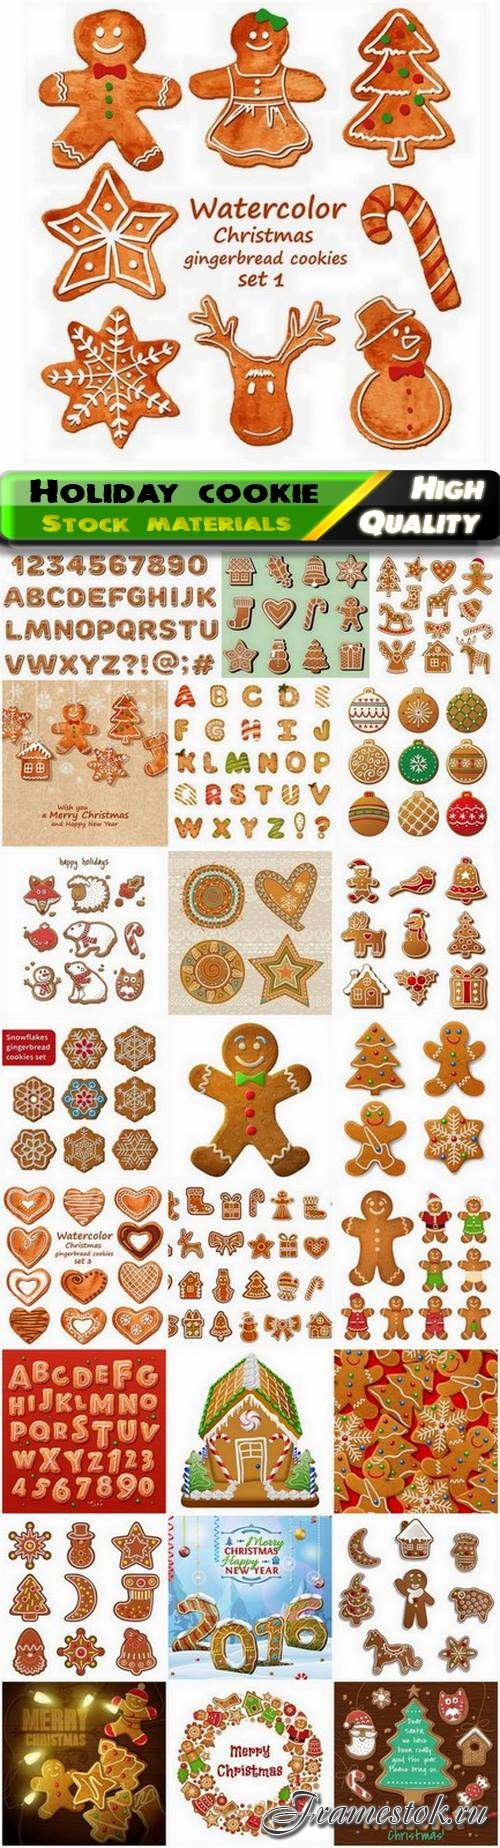 New Year and Christmas holiday sweet cookie with glaze - 25 Eps